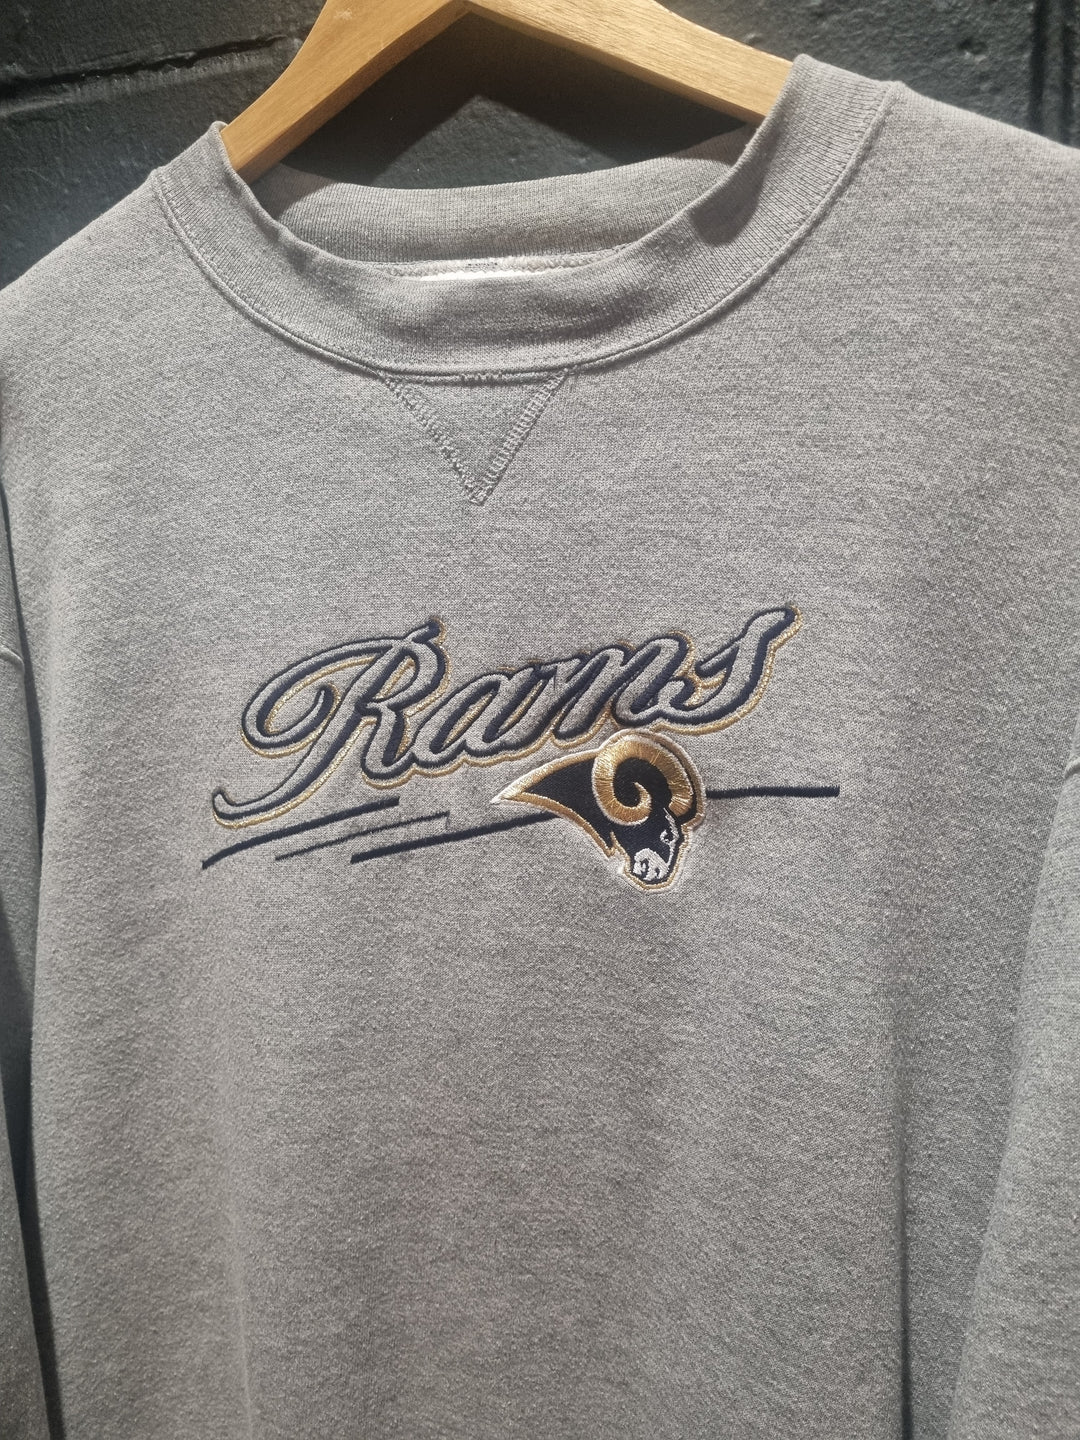 LA Rams Made in USA XL